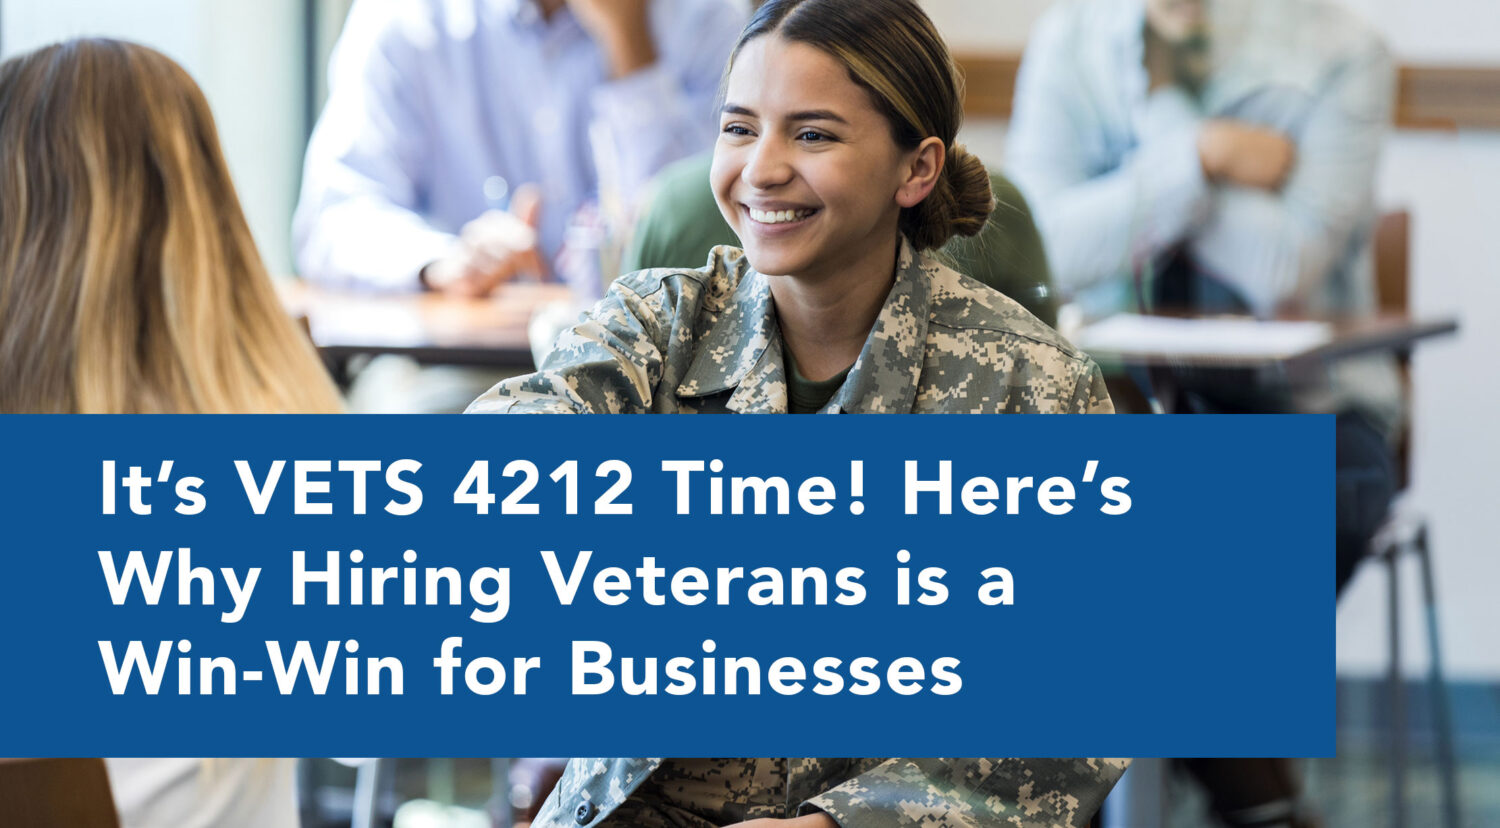 Why hiring veterans is a win-win for businesses